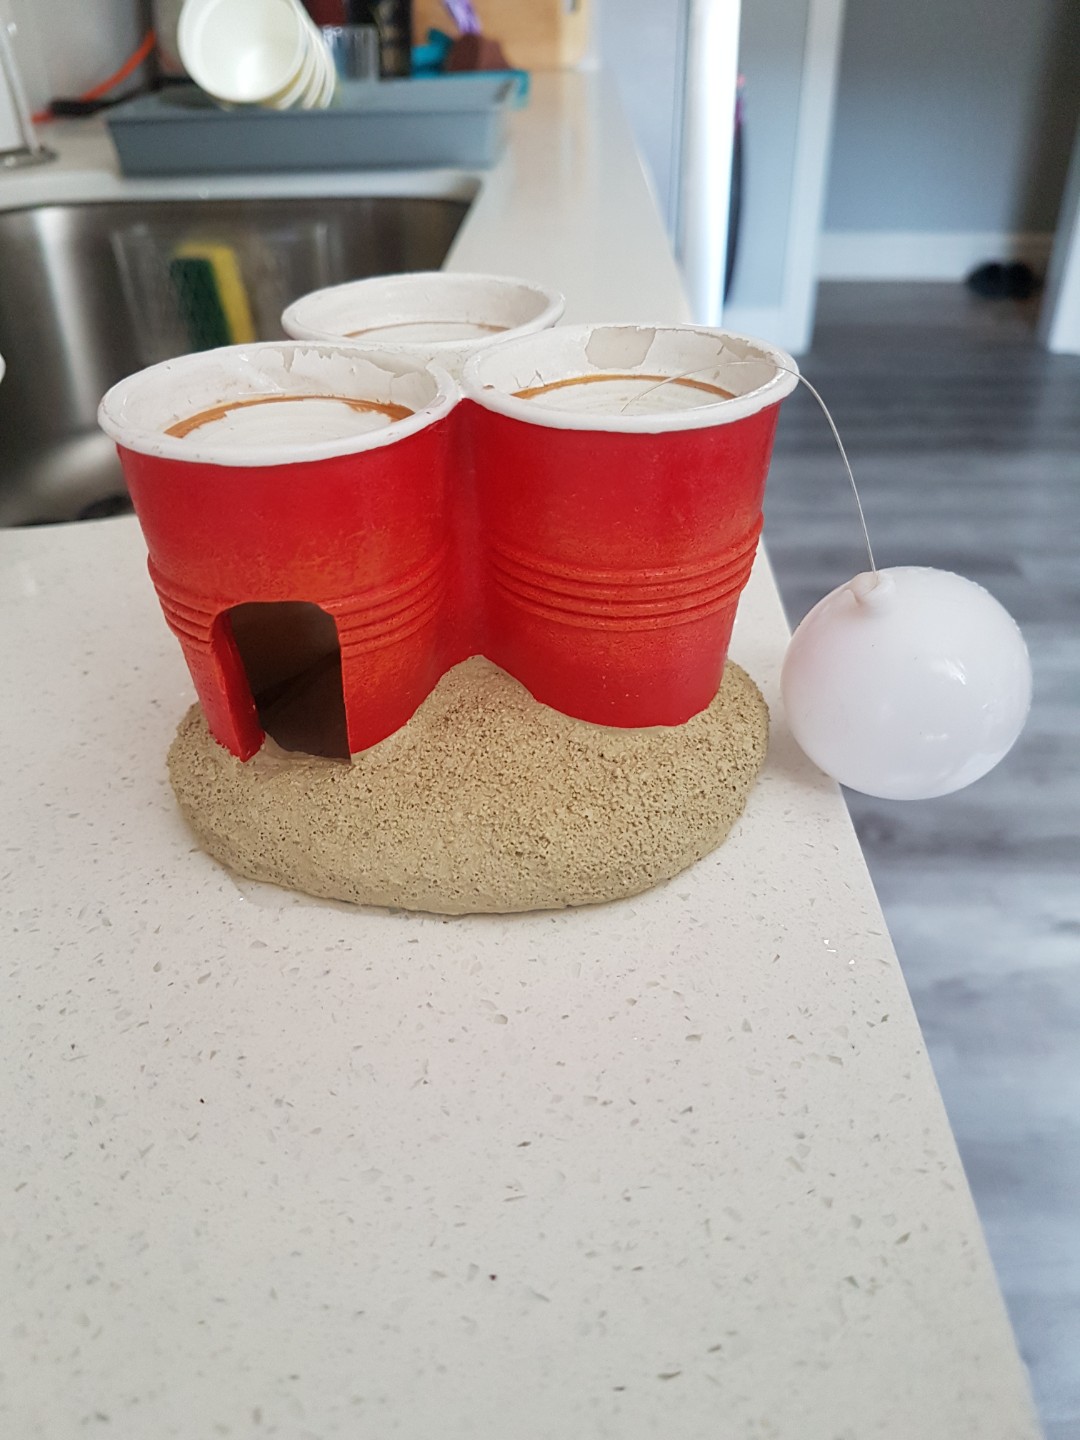 Aquarium Ornament/Decoration: Fish Hide Home, Beer Pong Cups with Floating Ball